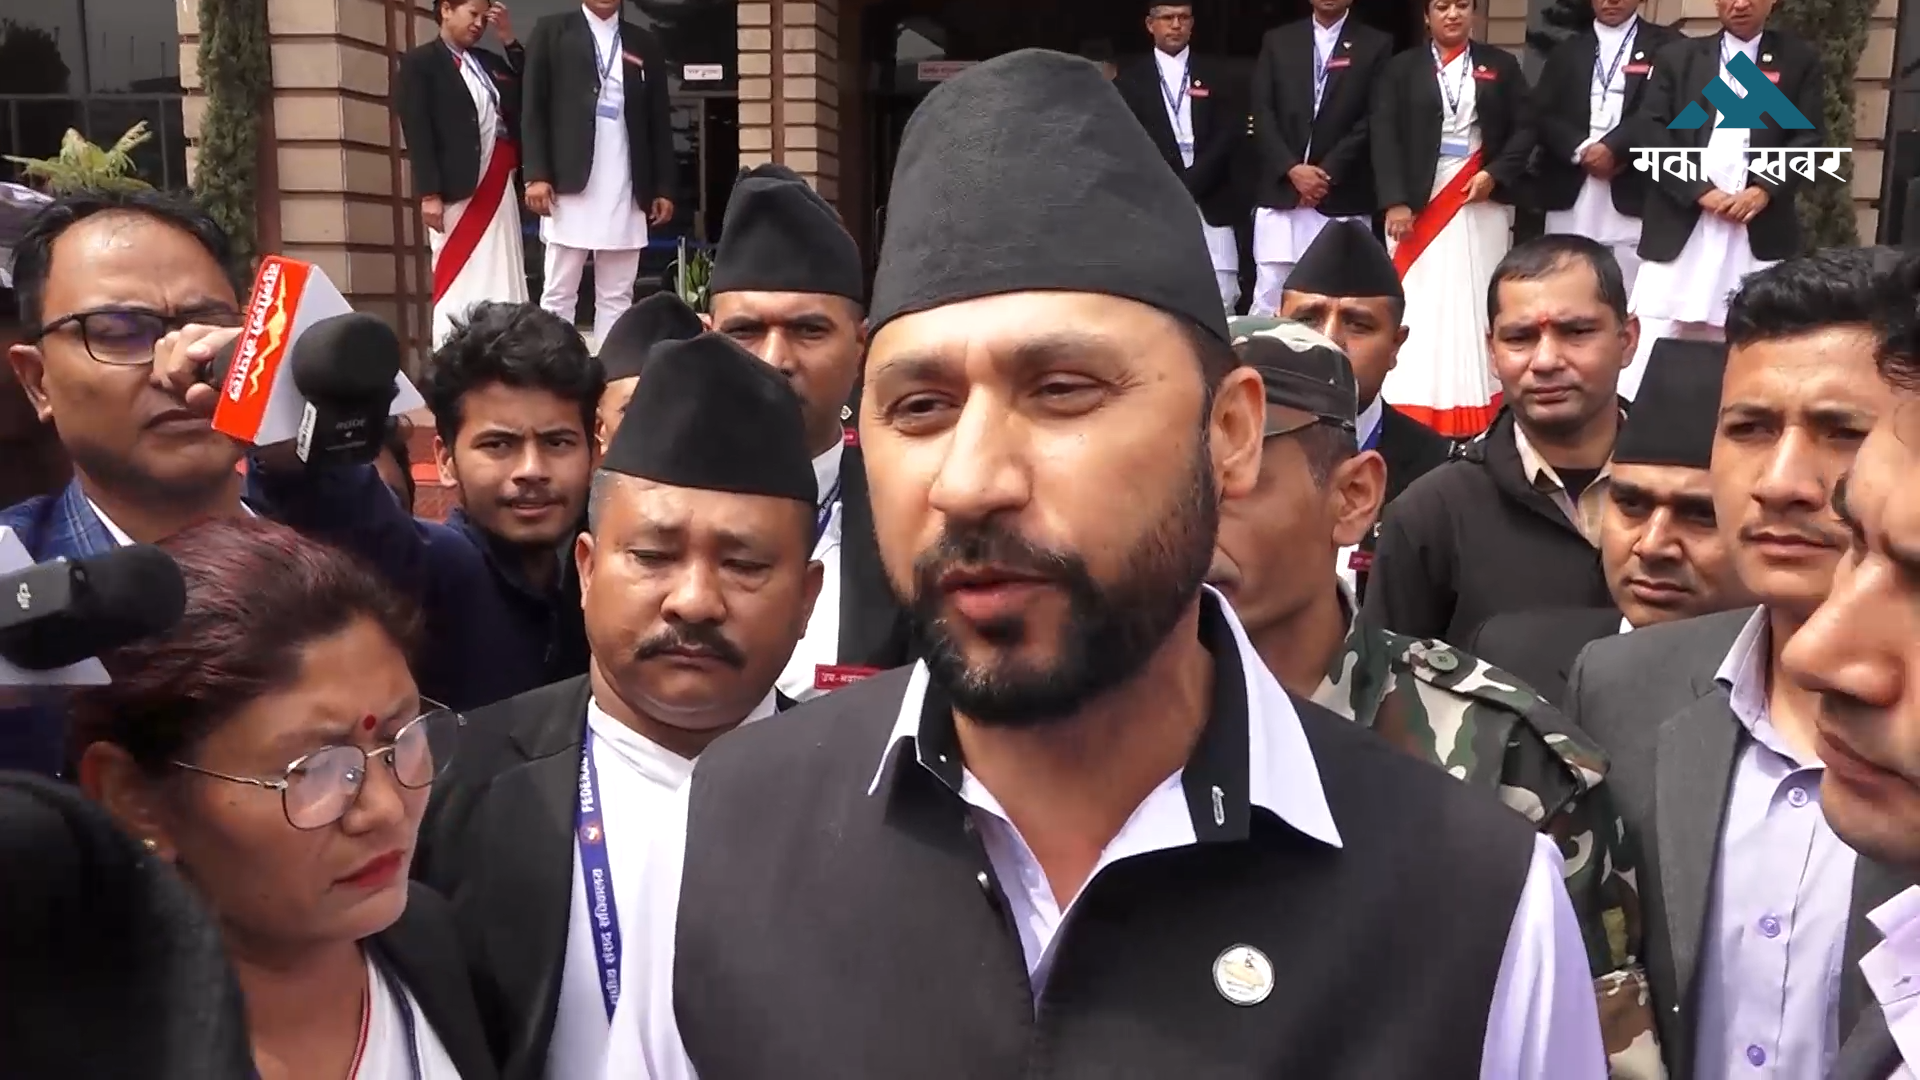 Home Minister Lamichhane: Congress made a mockery of democracy